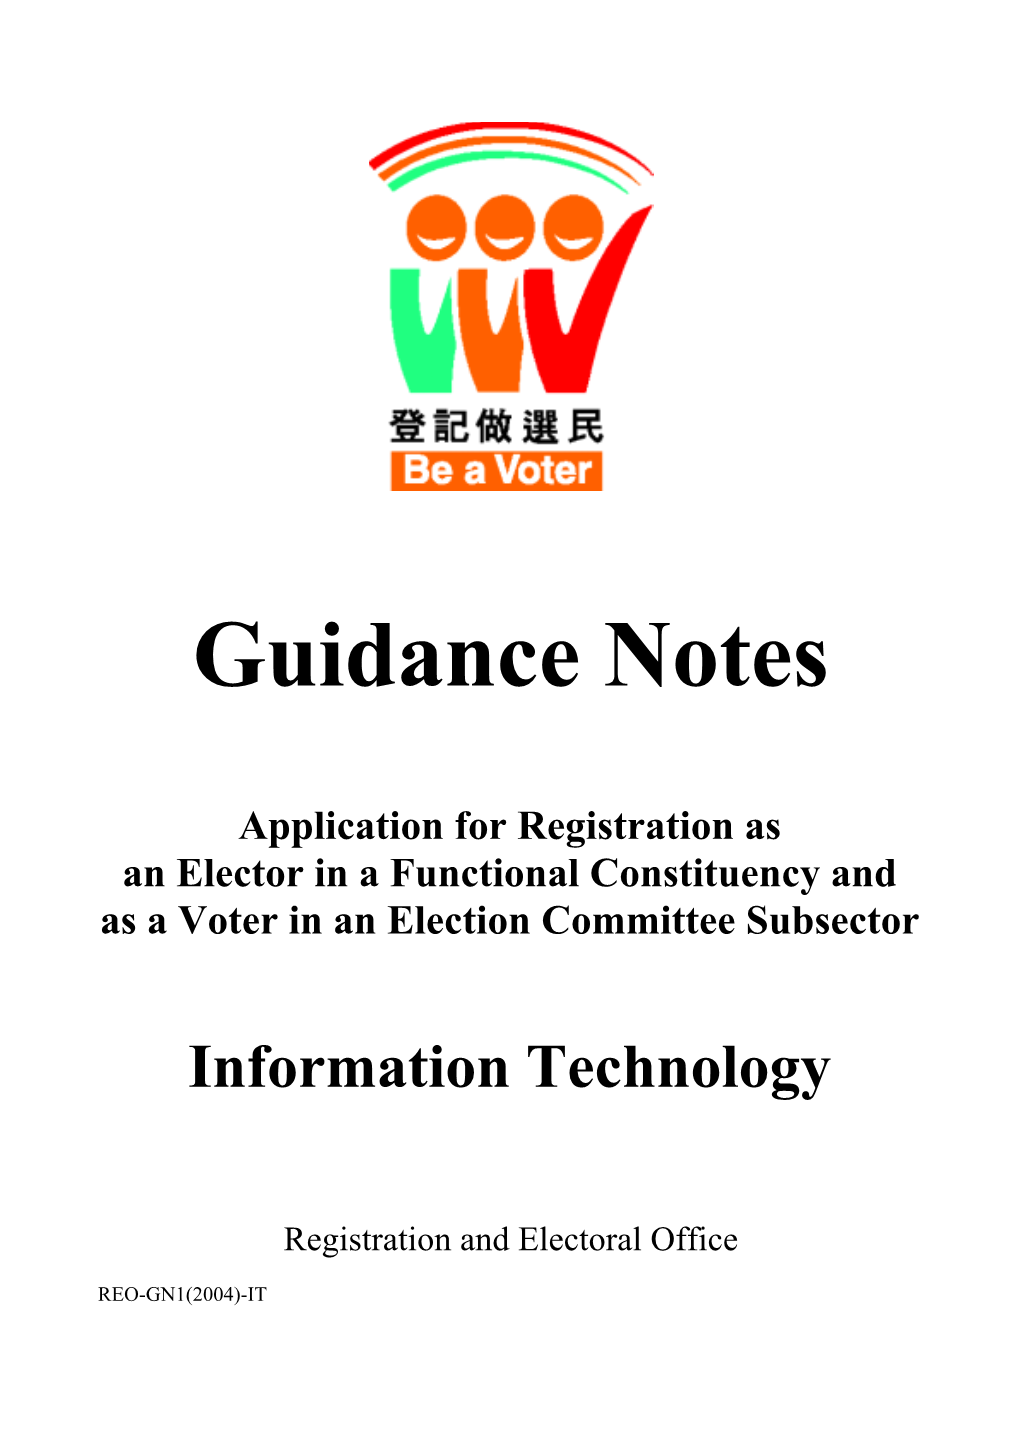 Guidance Notes Application for Registration As an Elector in A